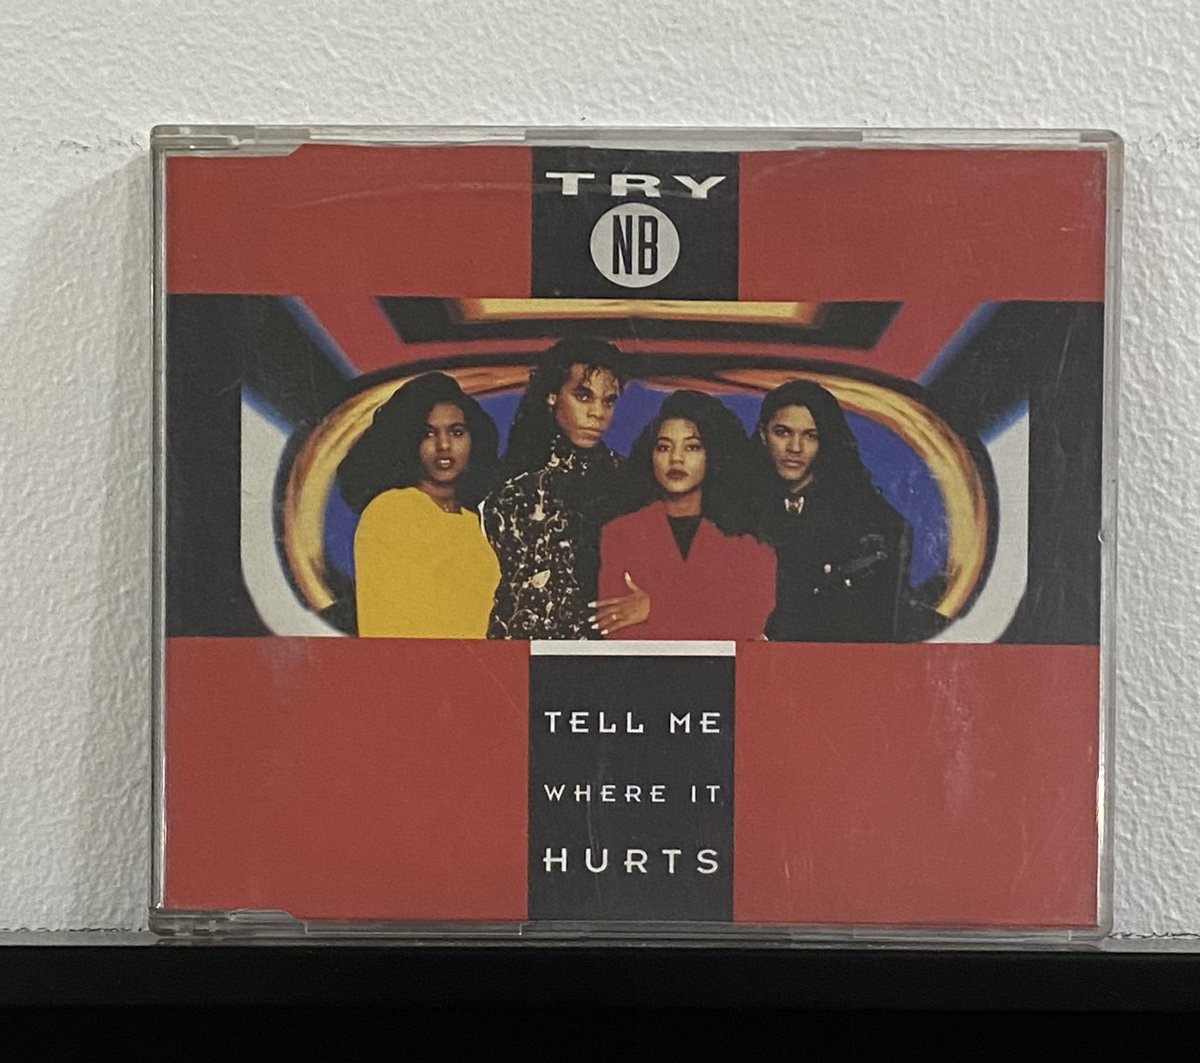 June 17, 2023

“Tell Me Where It Hurts” - Try ‘N’ B (CD Single) #physicalmedia 
#cdsingle
#cdcollection 
#cdcollector 
#AndreDiscOfTheDay 
#discoftheday Full post: facebook.com/713124042/post…